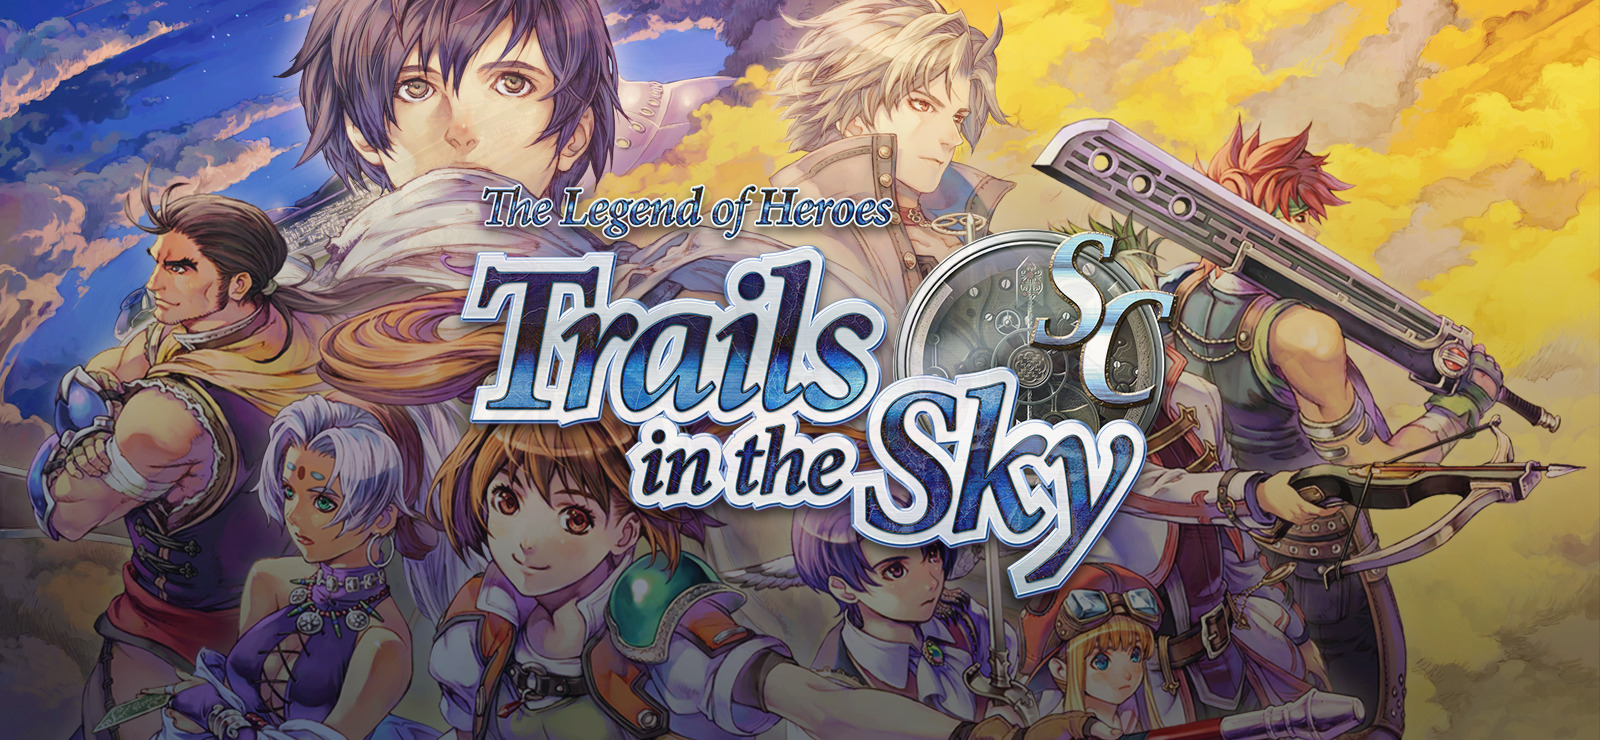 legend of heroes trail in the sky